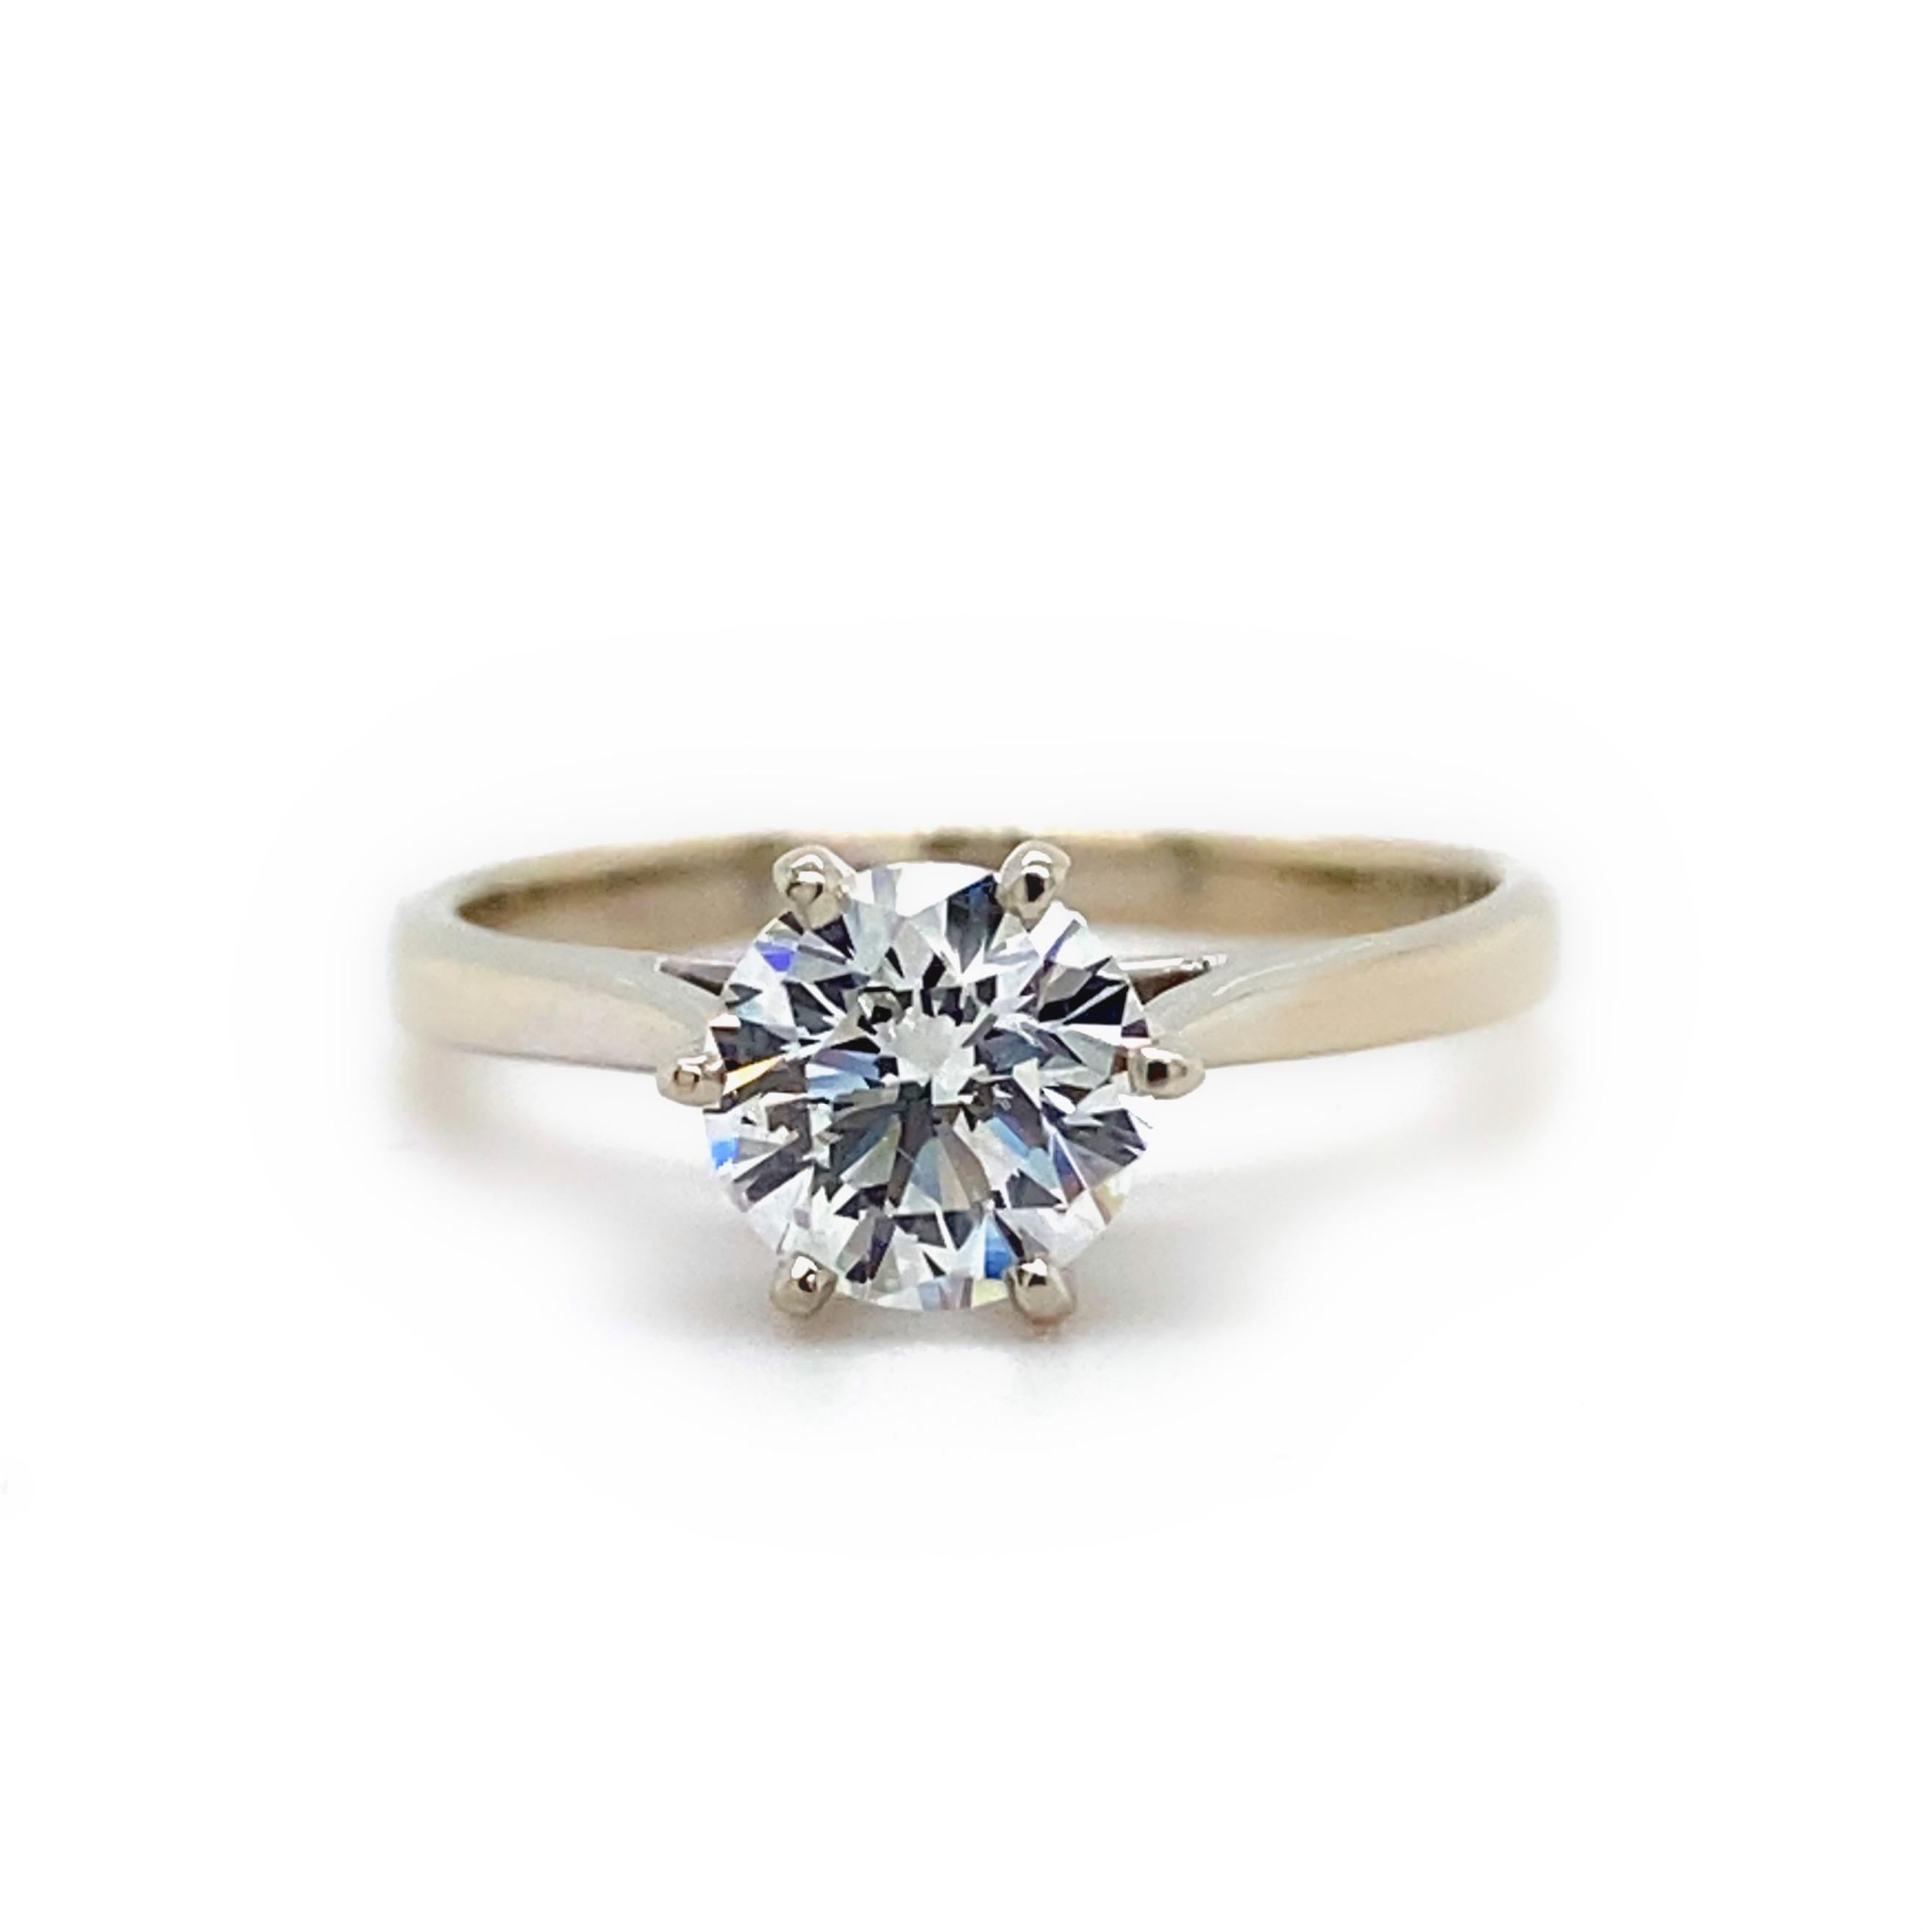 LAZARE KAPLAN Round Brilliant Diamond 1CT F VS1 Engagement Ring in 14kt WG GIA For Sale 4